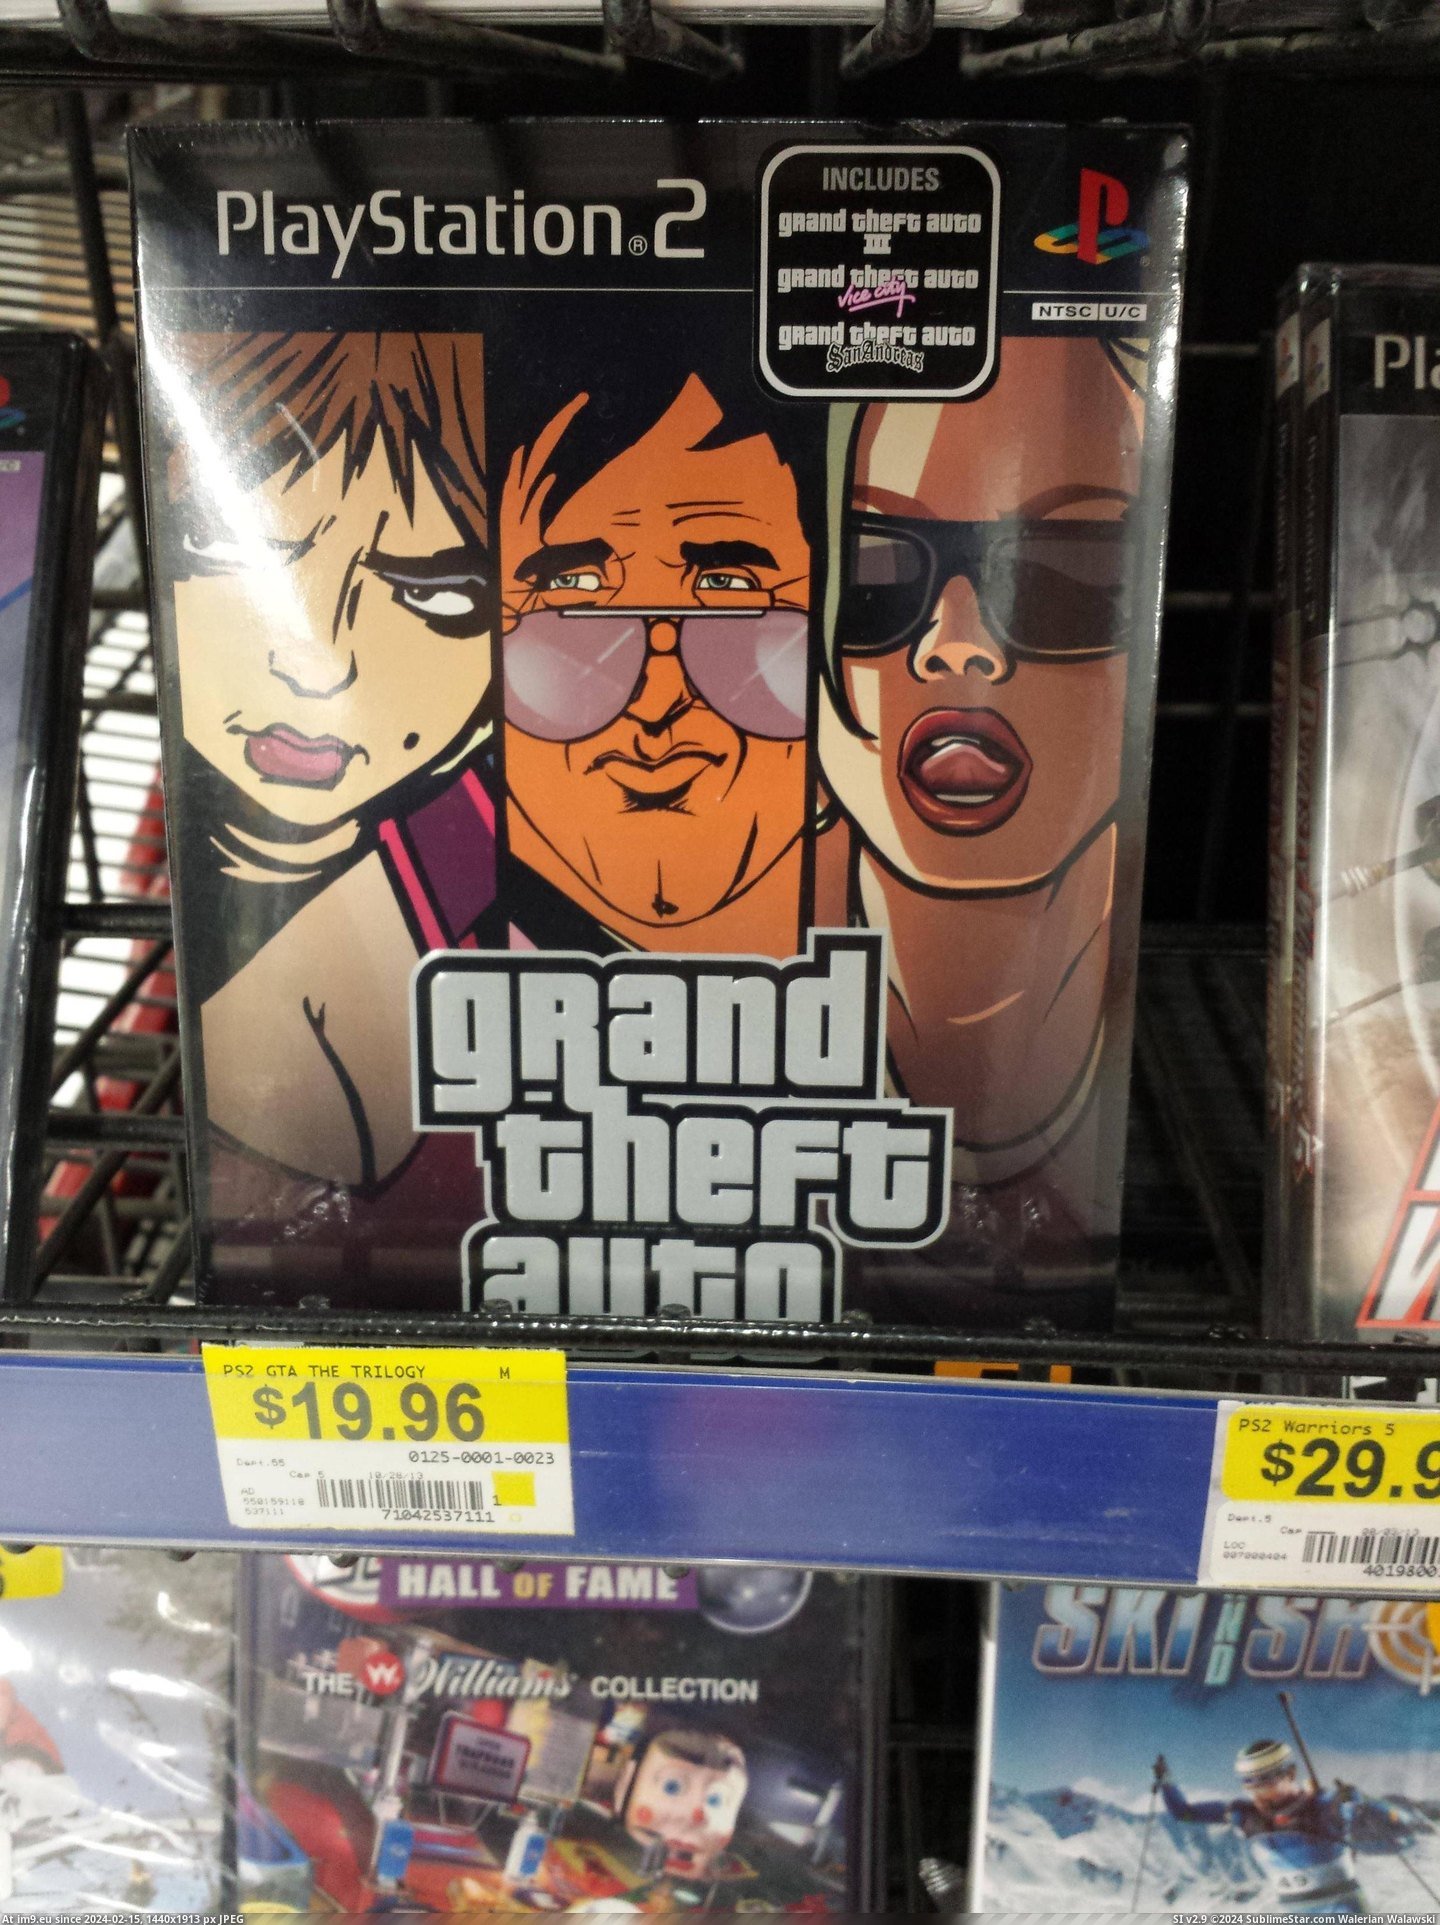 #Gaming #Games #Sold #Wal #Mart #Texas #Ps2 [Gaming] At a Wal-Mart in Texas. Didn't know ps2 games were still sold. Pic. (Image of album My r/GAMING favs))